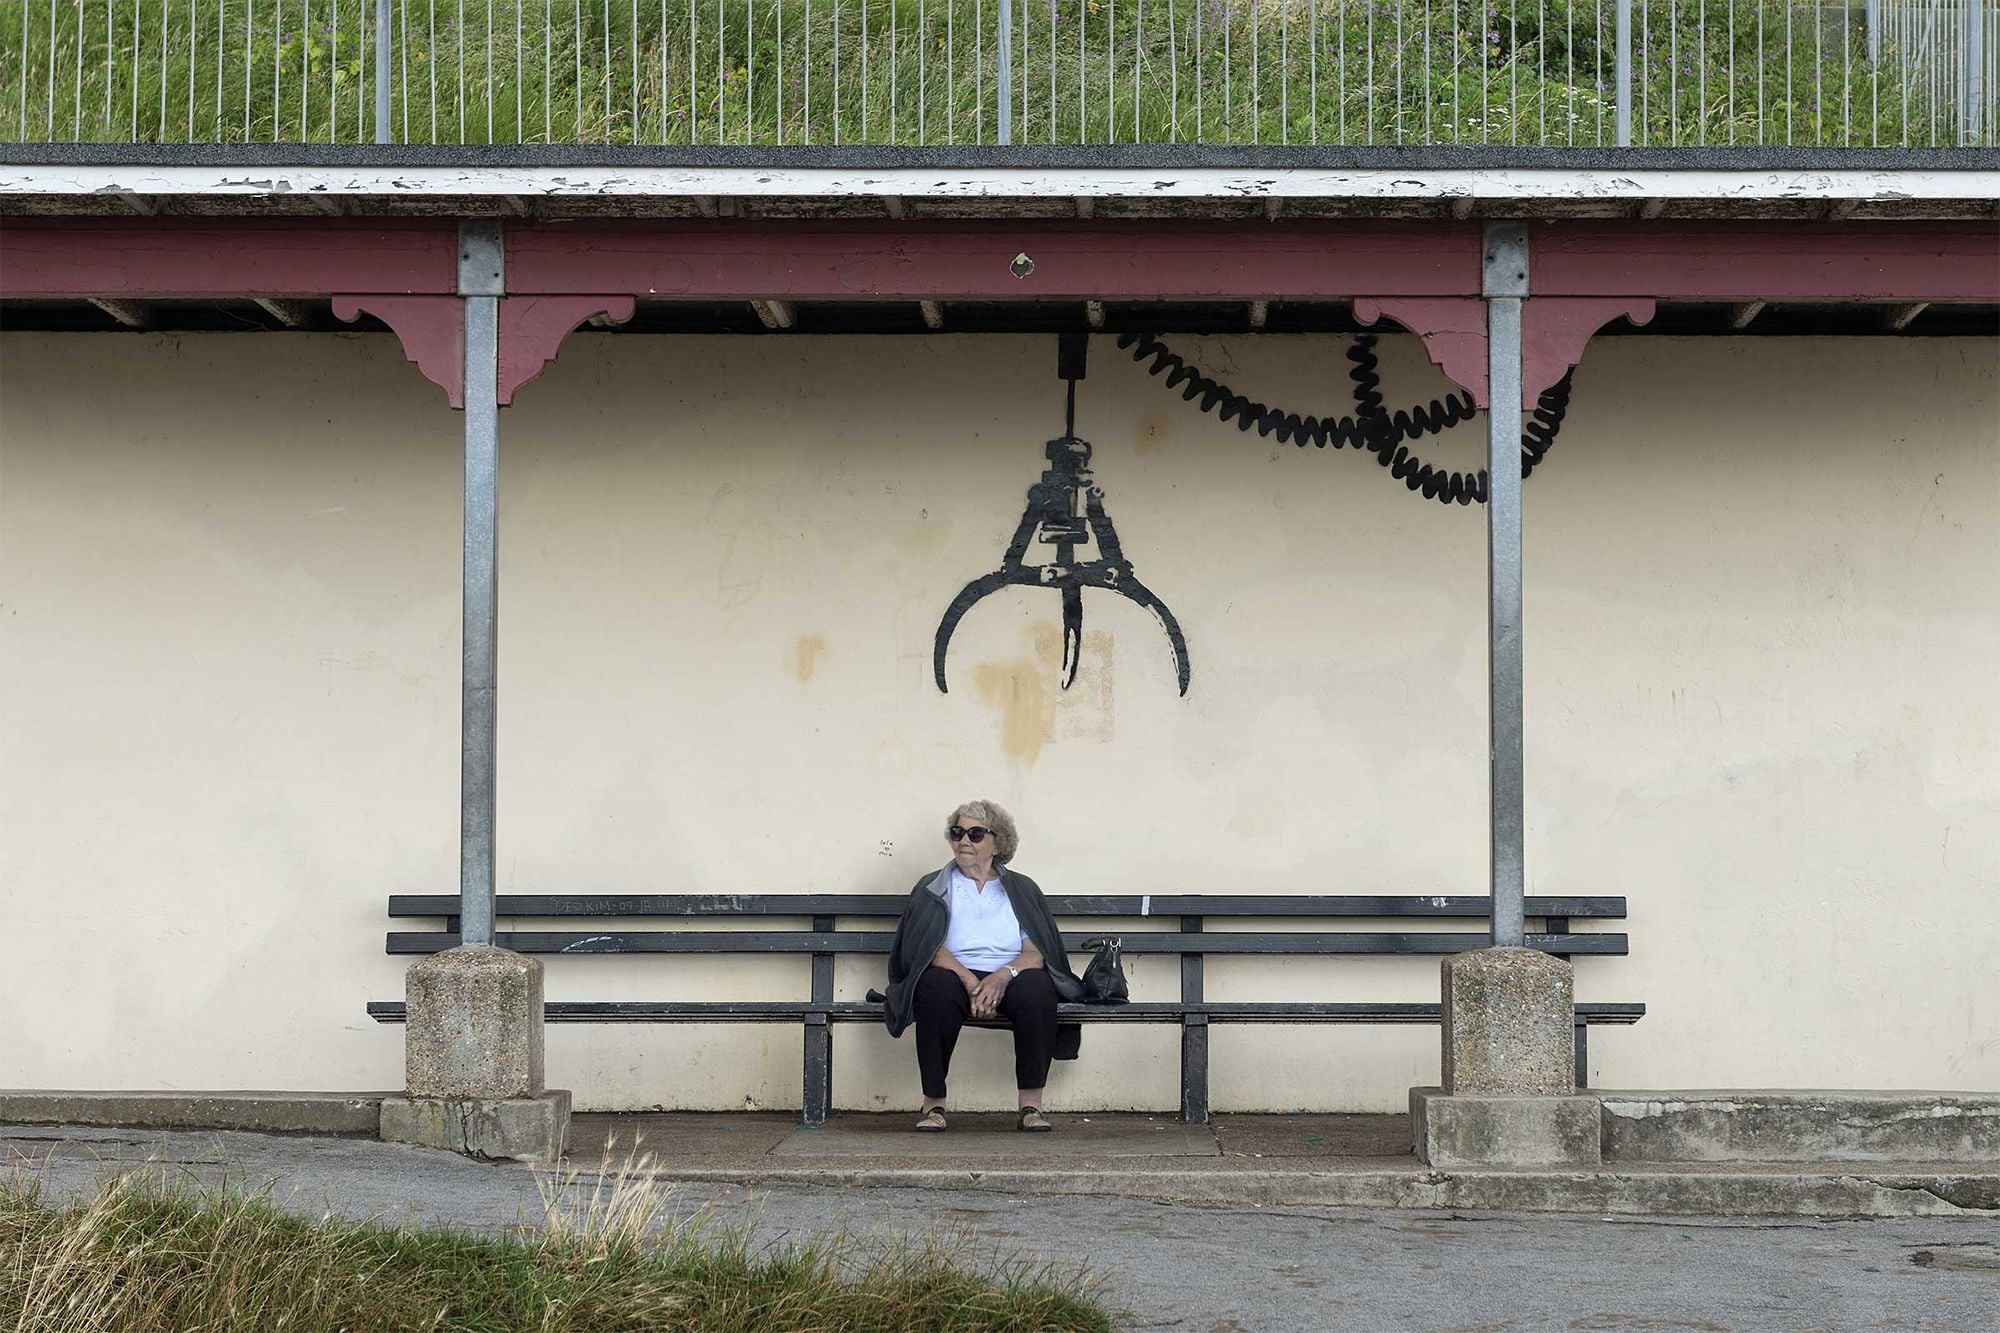 Large arcade-style claw painted over a bus stop as part of Banksy's new 